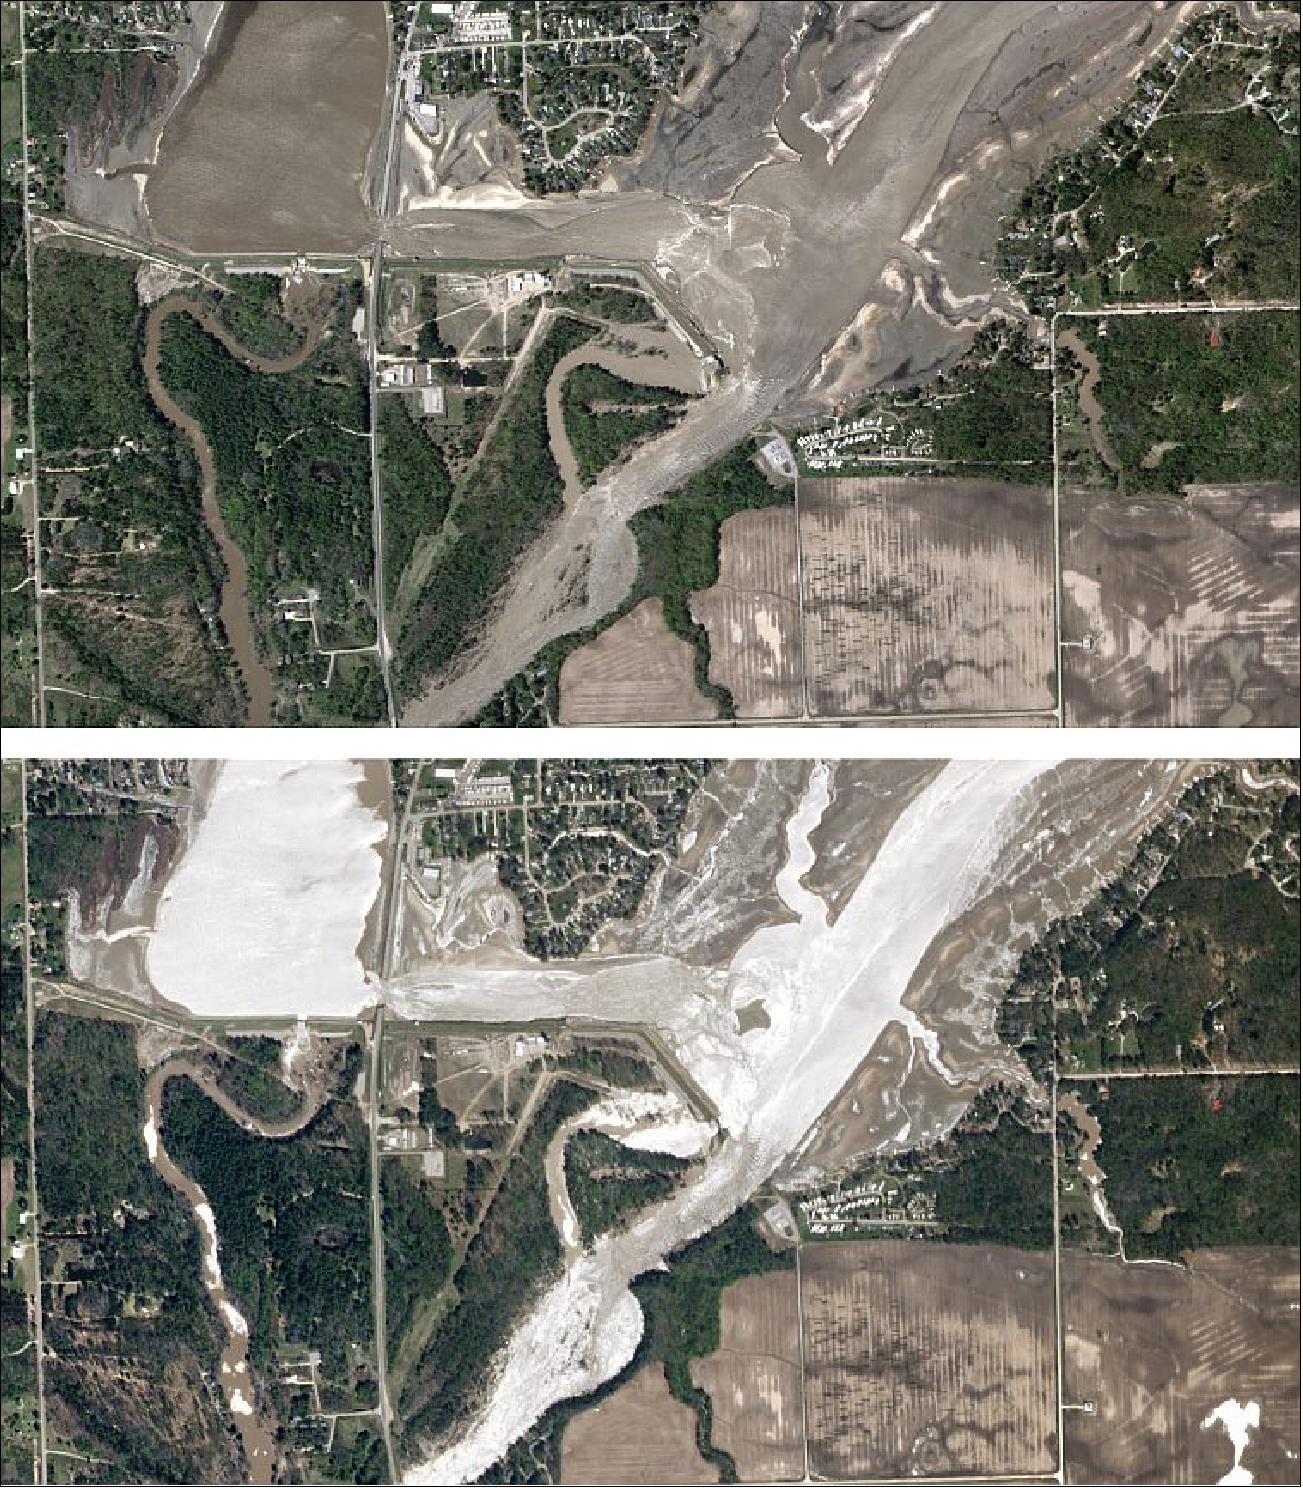 Figure 18: The first SkySat image (taken in the morning) and second SkySat image (taken in the afternoon) were collected on May 20, 2020, and show the remains of the Edenville Dam, breached after heavy rainfall over Michigan. The silvery appearance of the water in the morning is due to sunglint, which is the reflection of light directly into the satellite’s telescope (image credit: © 2020, Planet Labs Inc., All Rights Reserved)